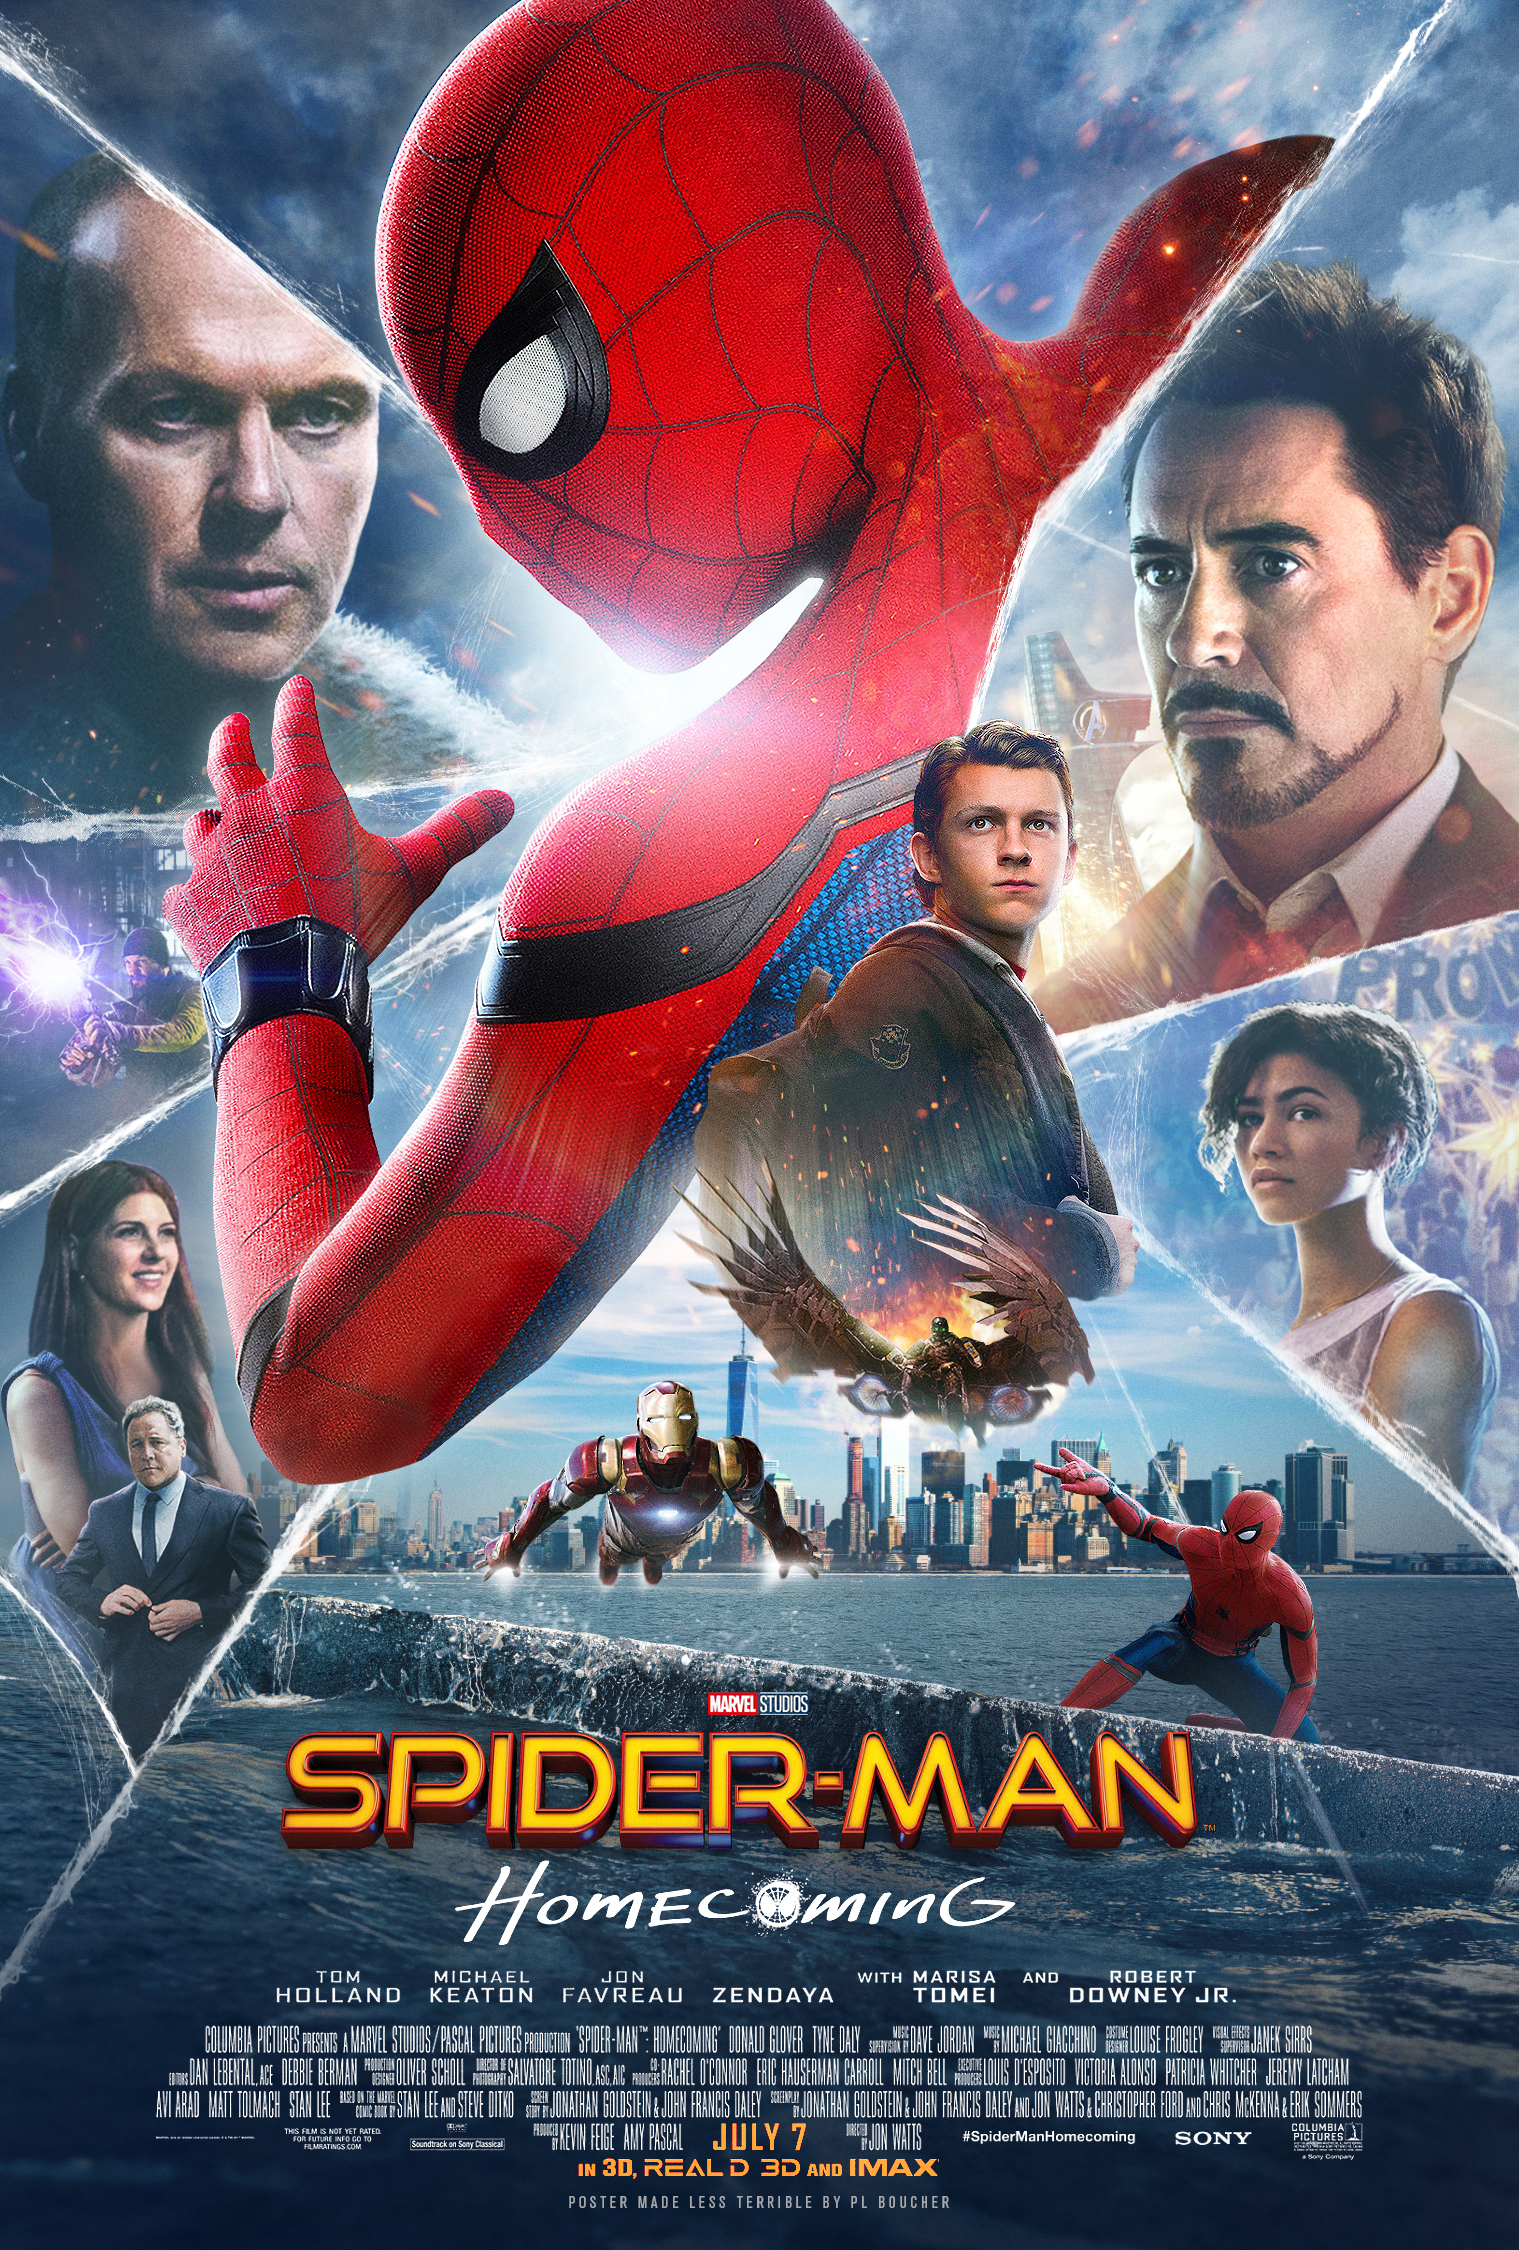 Image result for spider-man homecoming movie poster 2017